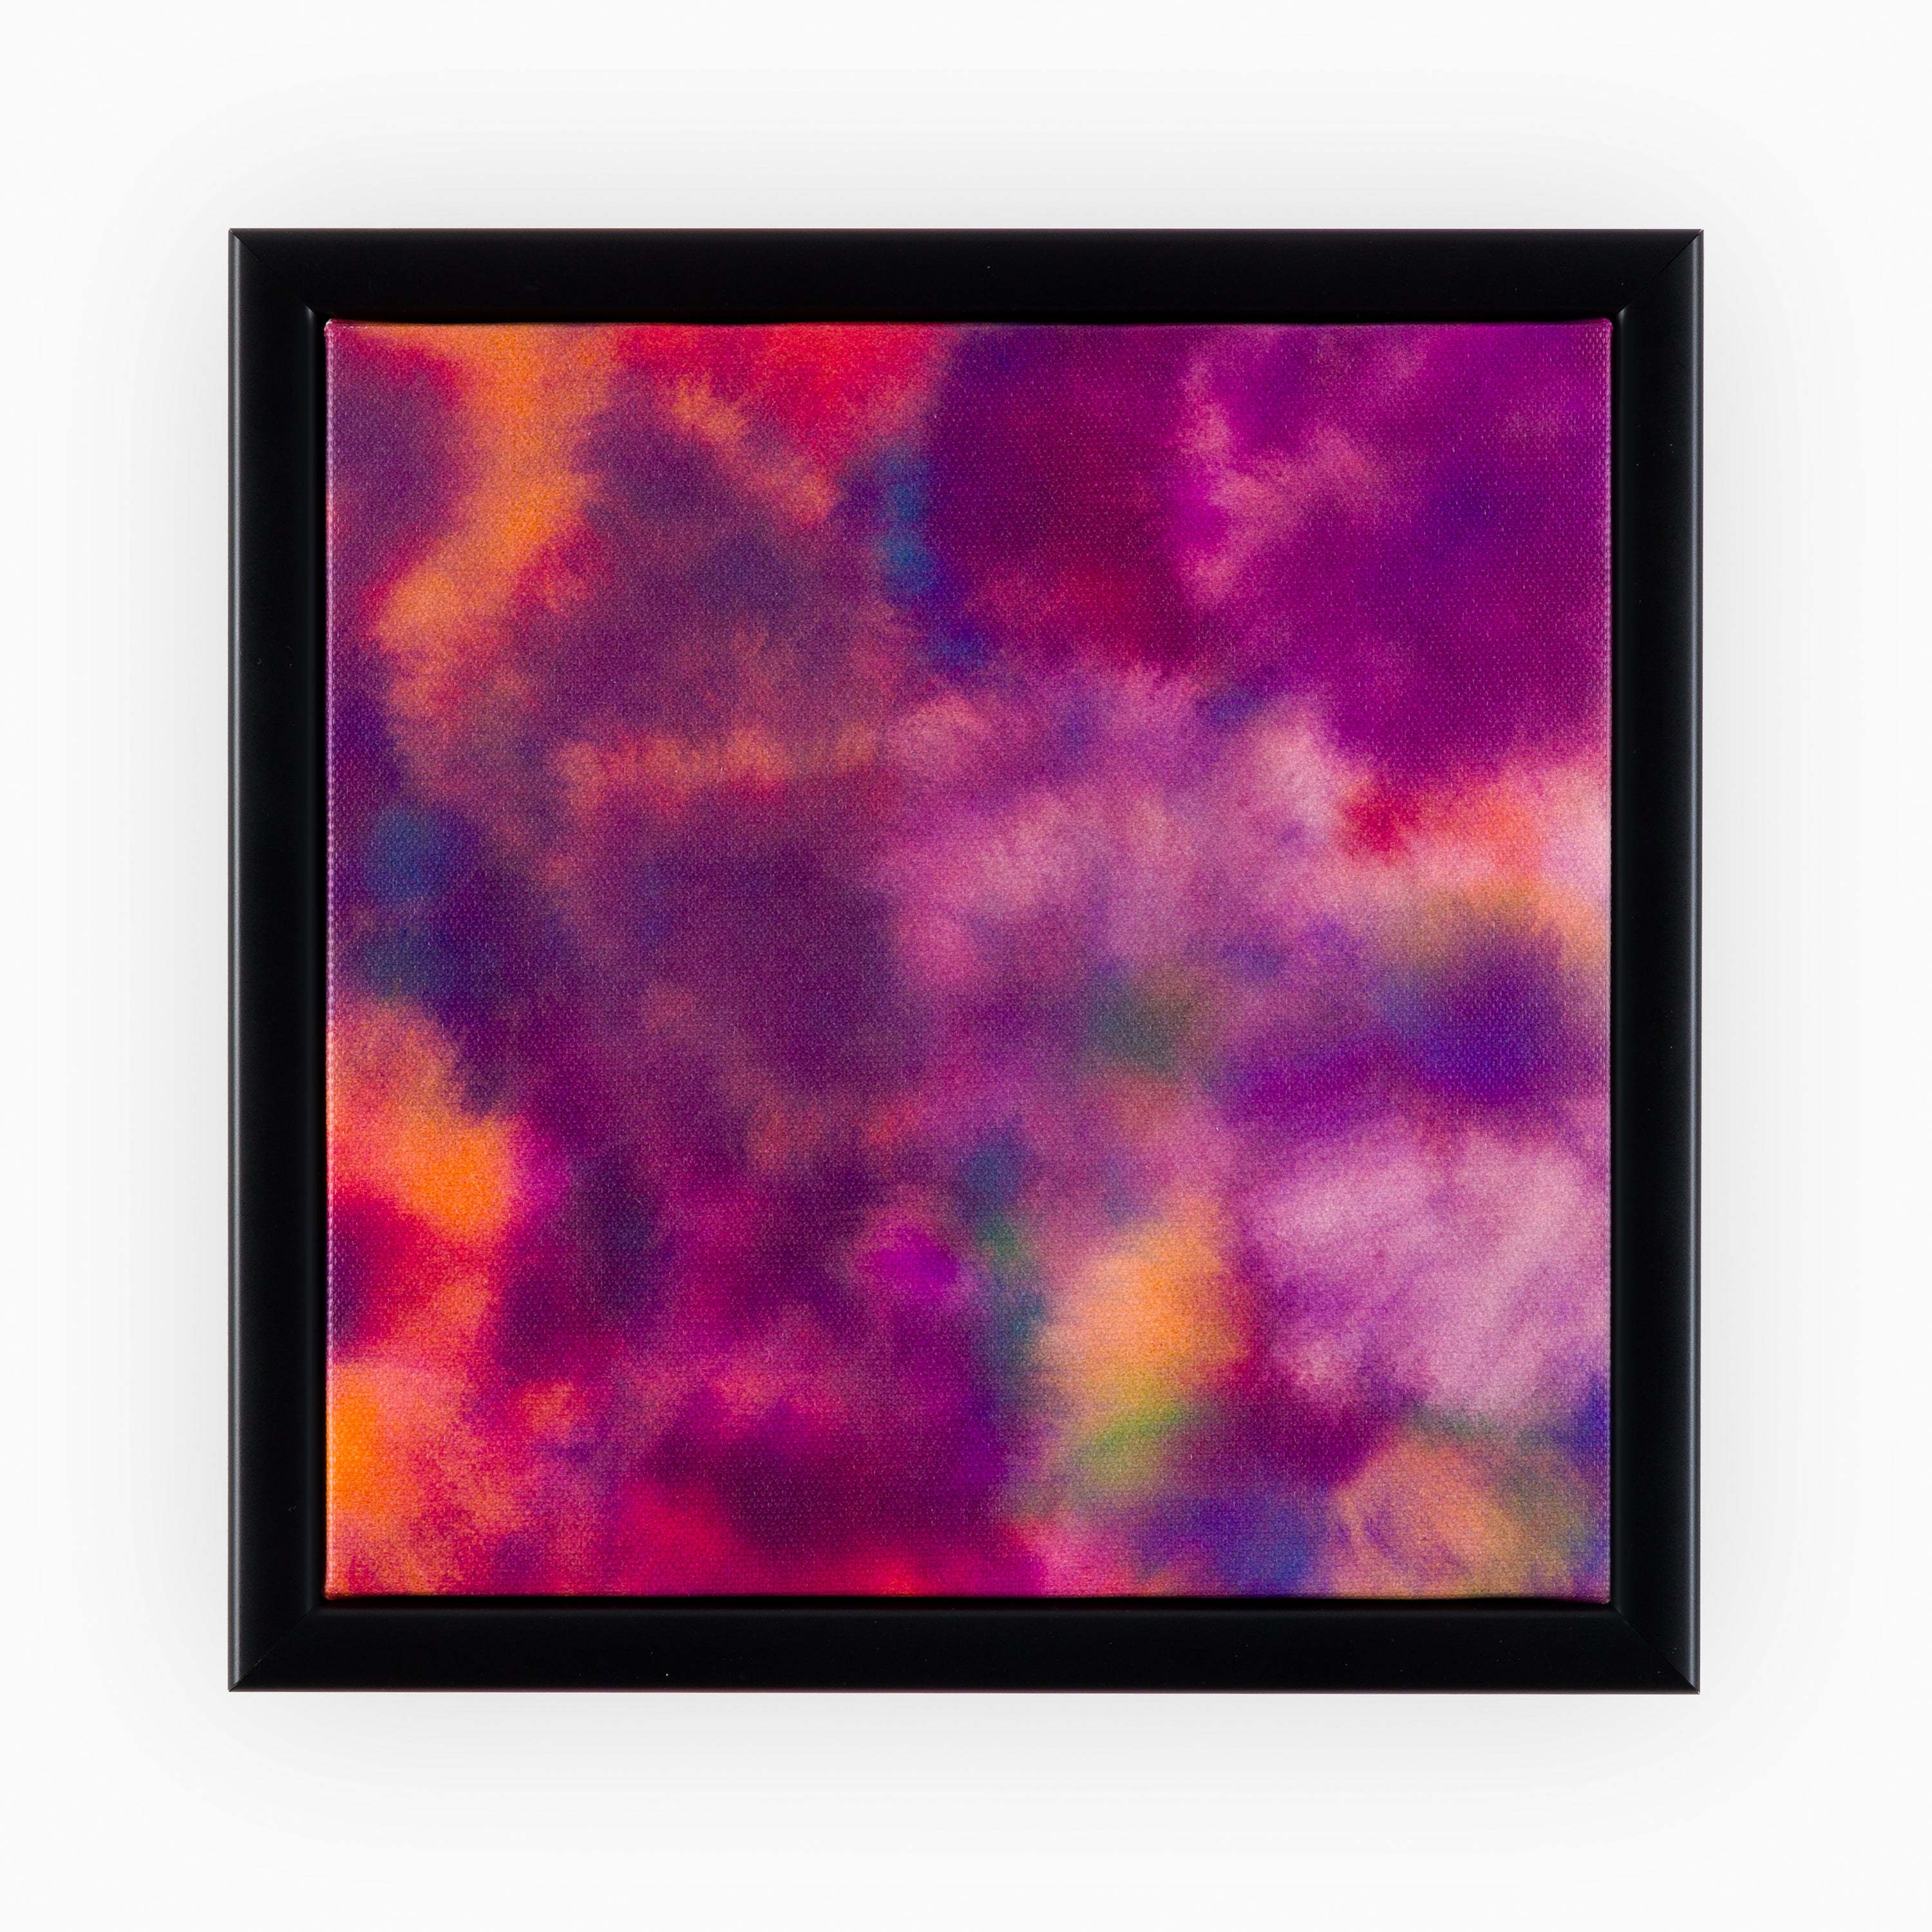 Framed Canvas in a sleek black frame, displaying a vibrant abstract mélange of deep purples, fiery oranges, and crimson hues, ideal for sophisticated interior décor. 